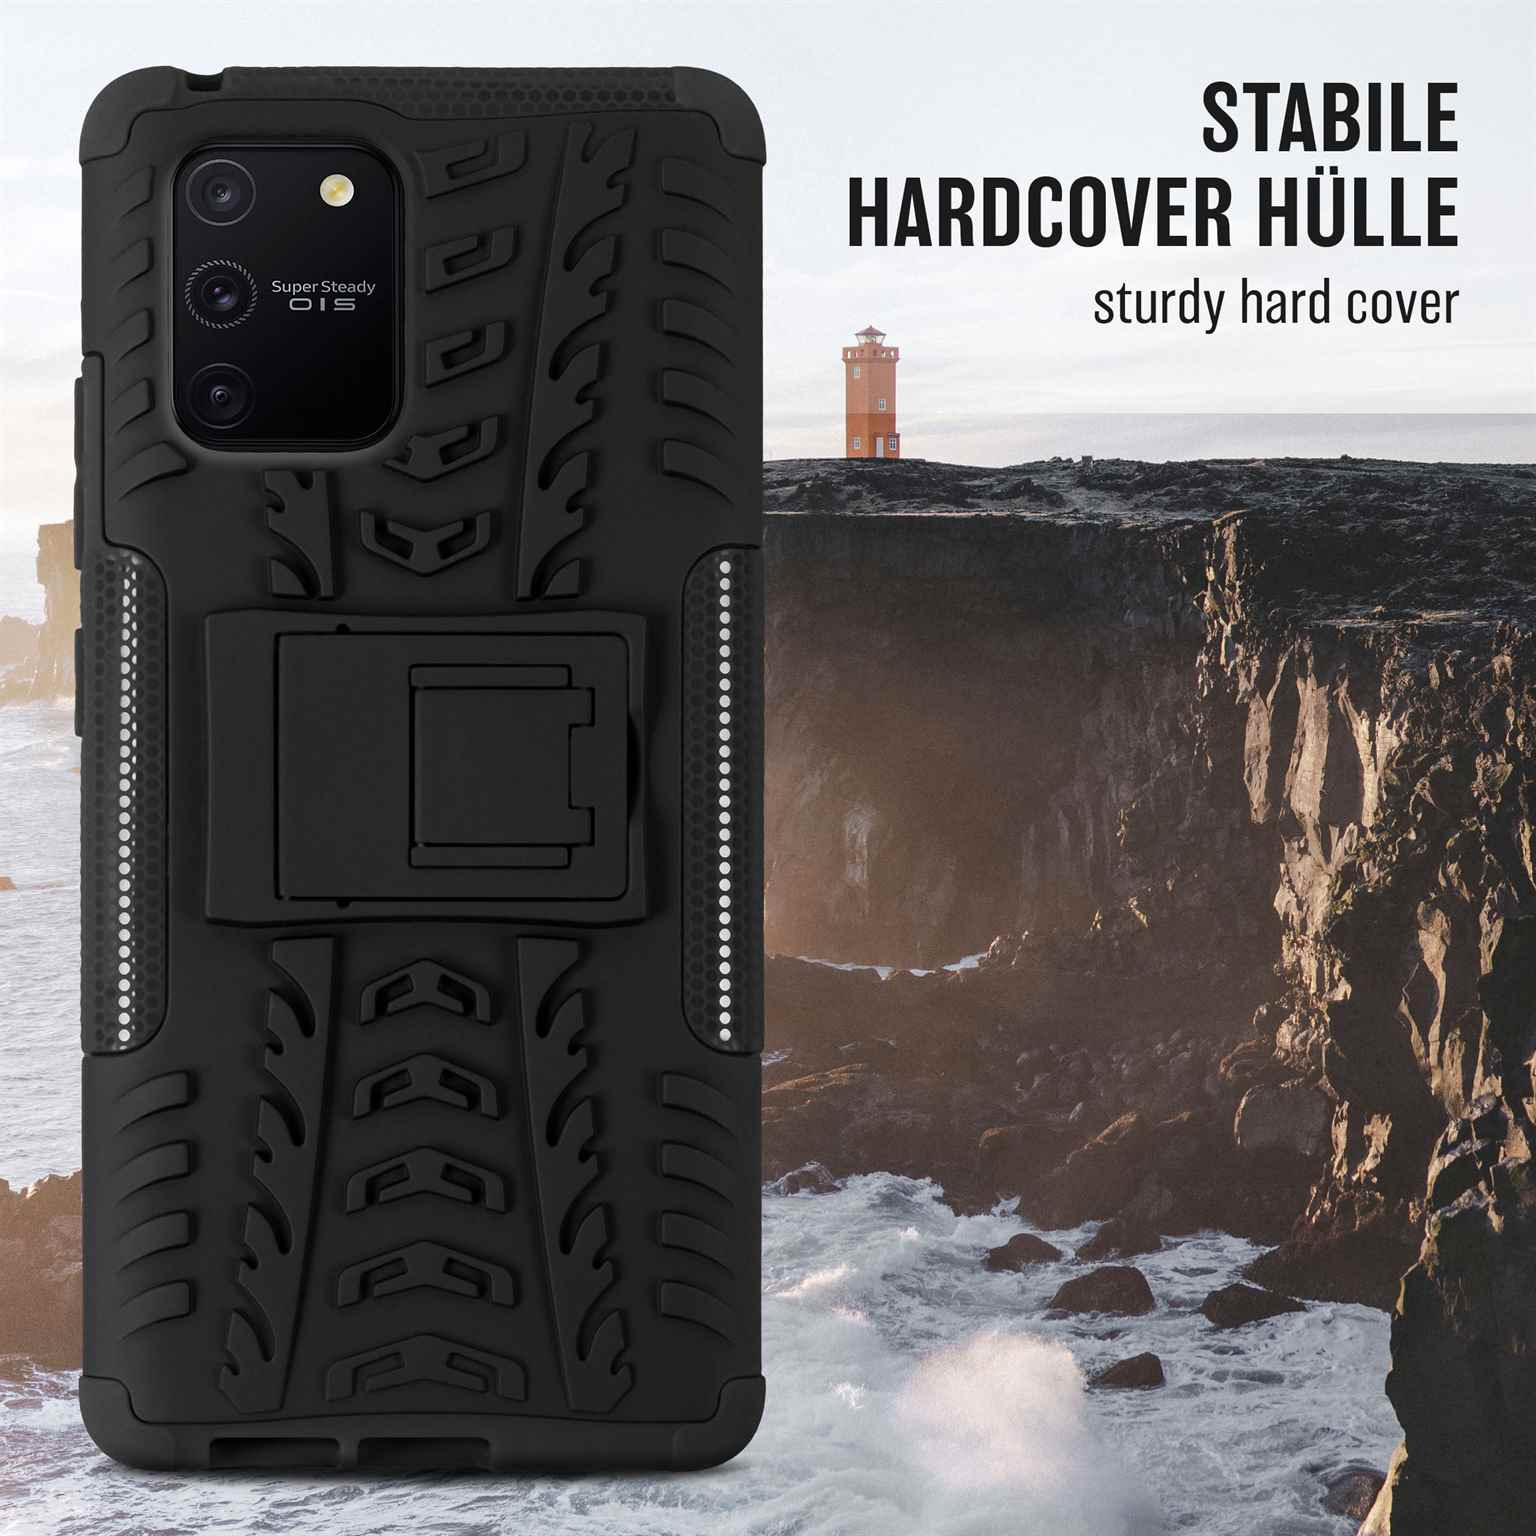 Galaxy Obsidian S10 Backcover, ONEFLOW Samsung, Lite, Case, Tank